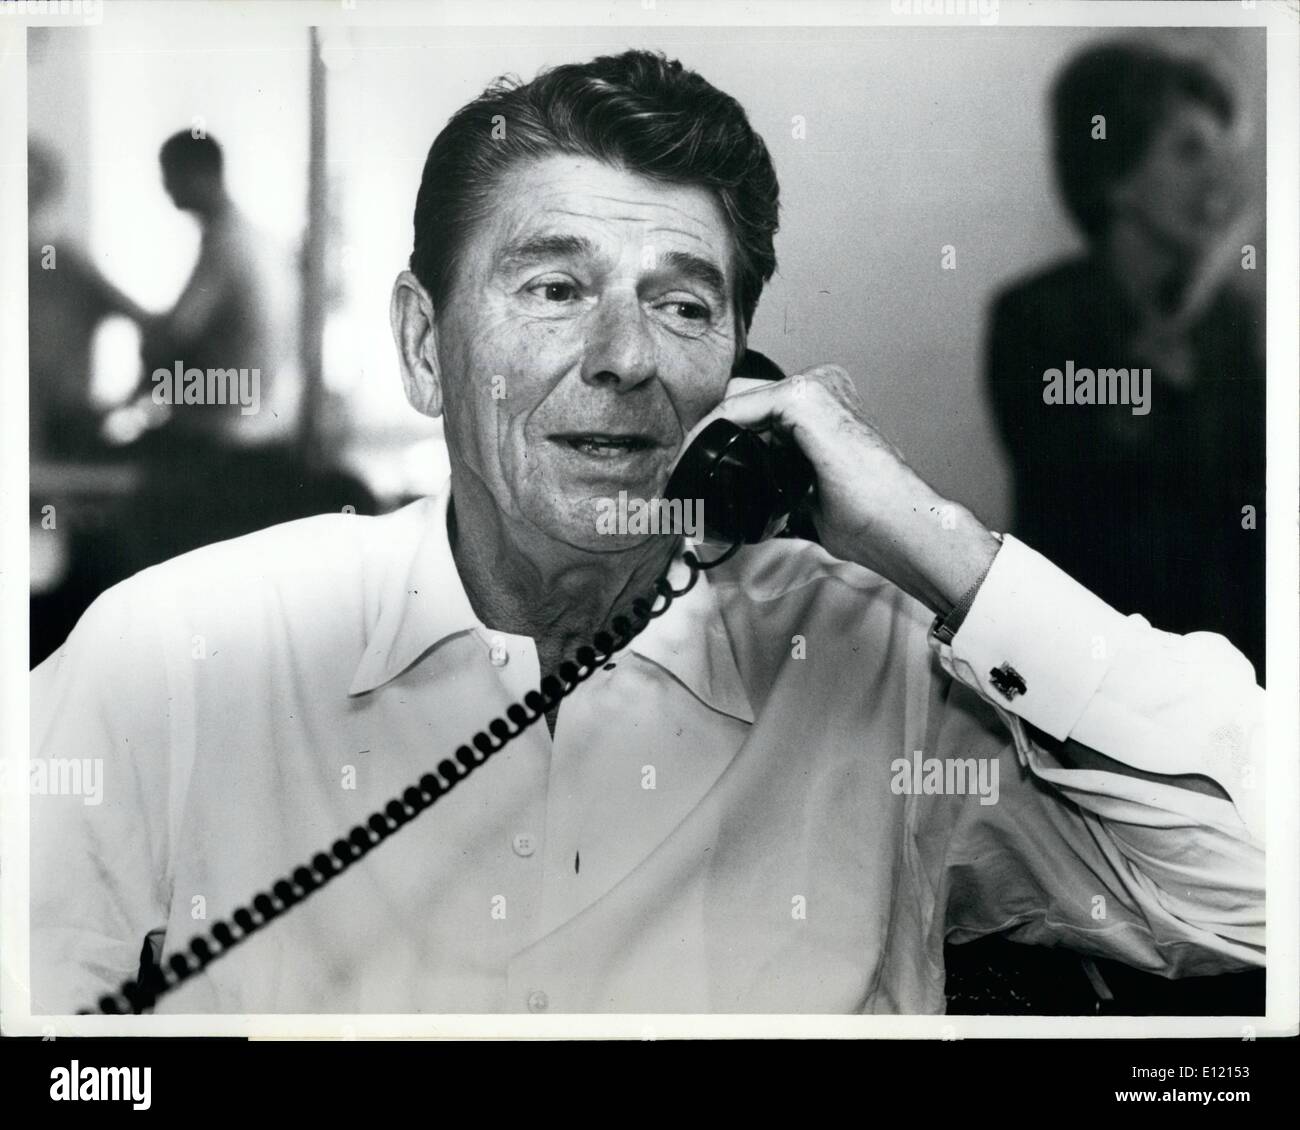 Jun. 06, 1981 - consolidated news pictures : Reagen pushed for his budget vote los angeles, Calif . President Ronald W. Reagan is shows in los angeles, California as he got on the phone to drum up support for his budget proposalds. The president is on a multi speaking tour and stayed overnight in Los Angeles to make his calls, the administration vote did finally make it through congress and with a good vote margin. white house photo from consolidated. Stock Photo